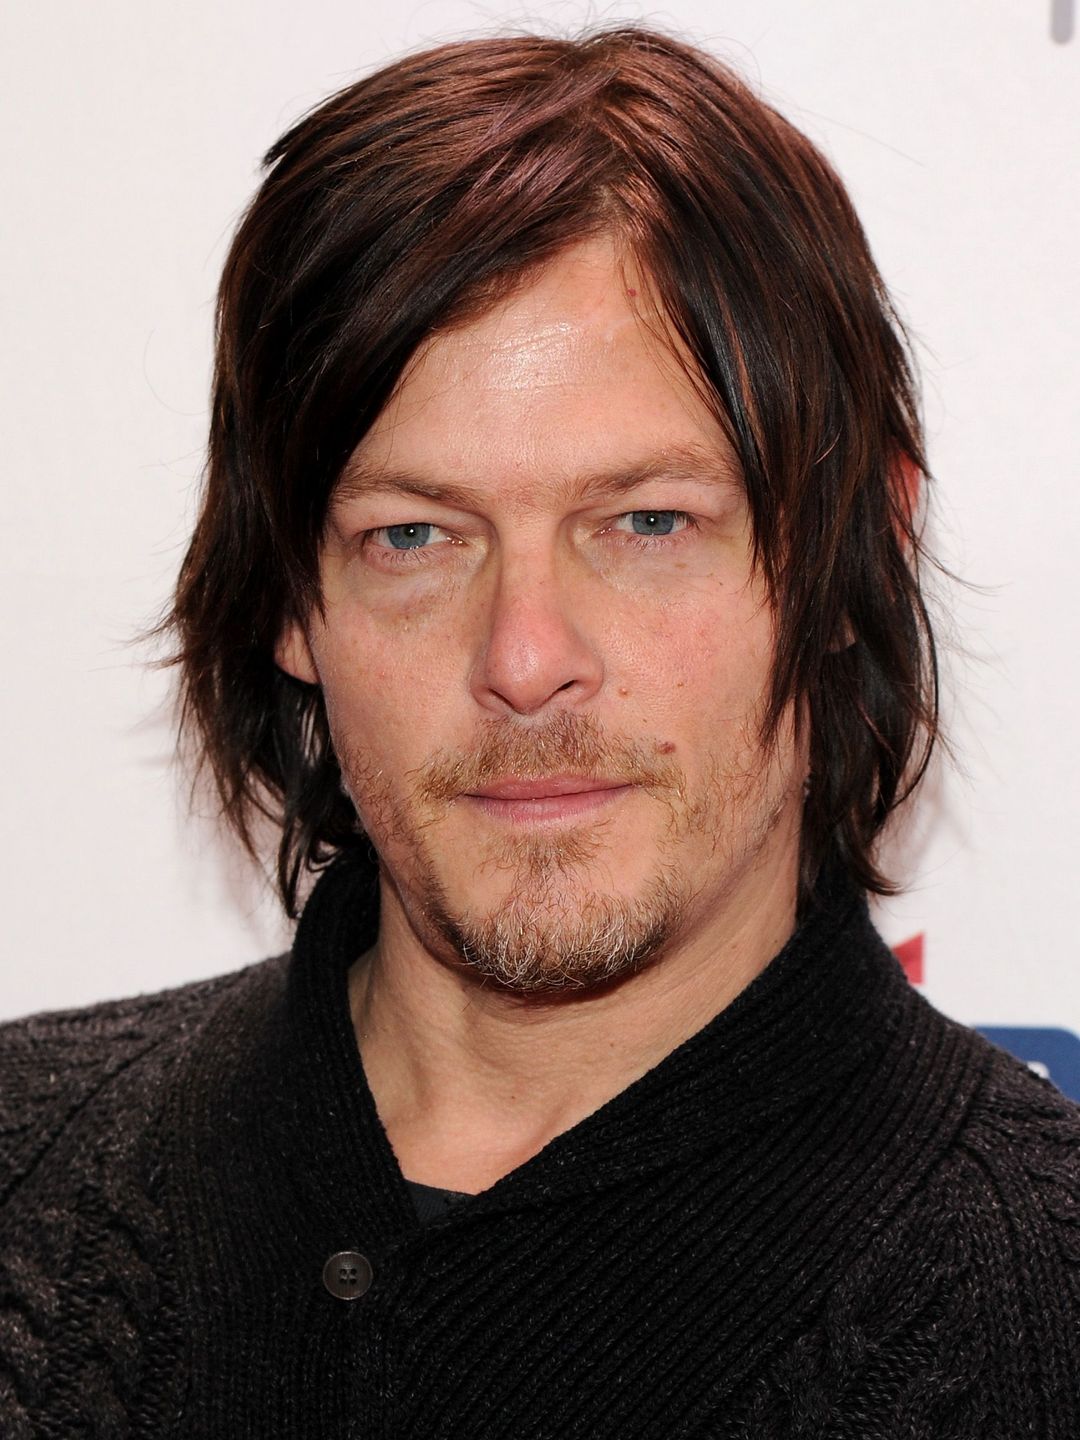 Norman Reedus who is he